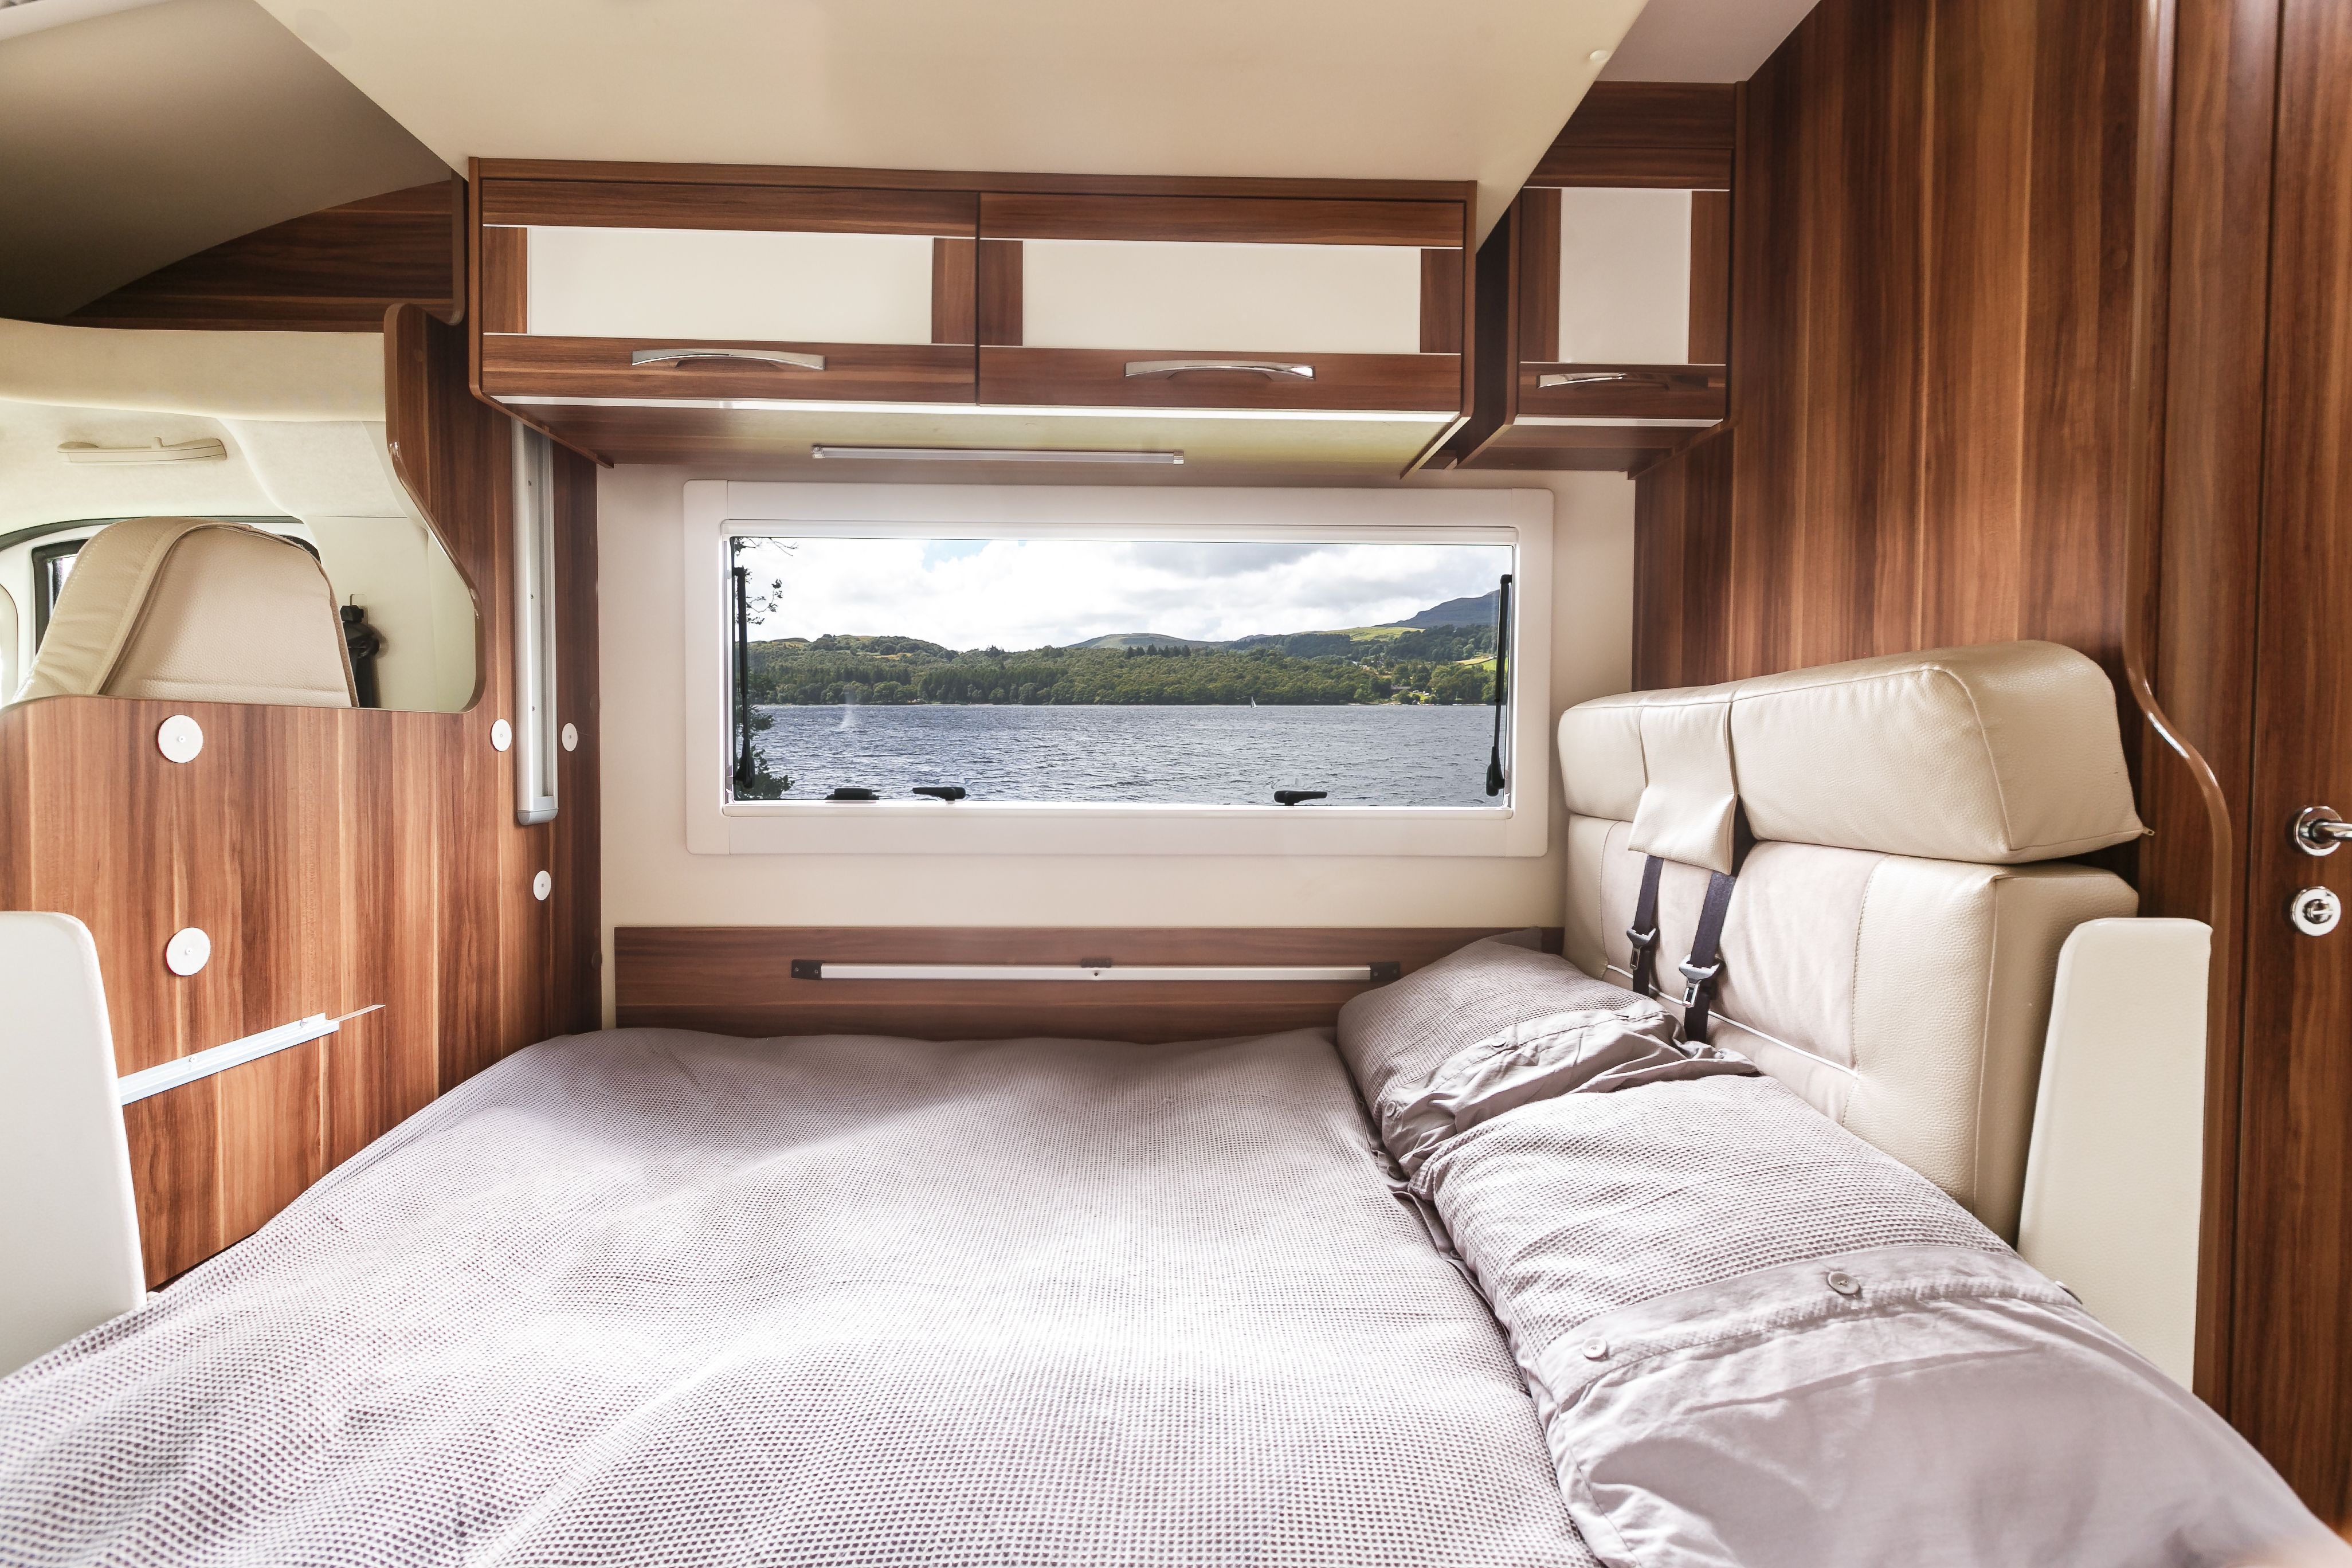 Motorhome Interior with bed